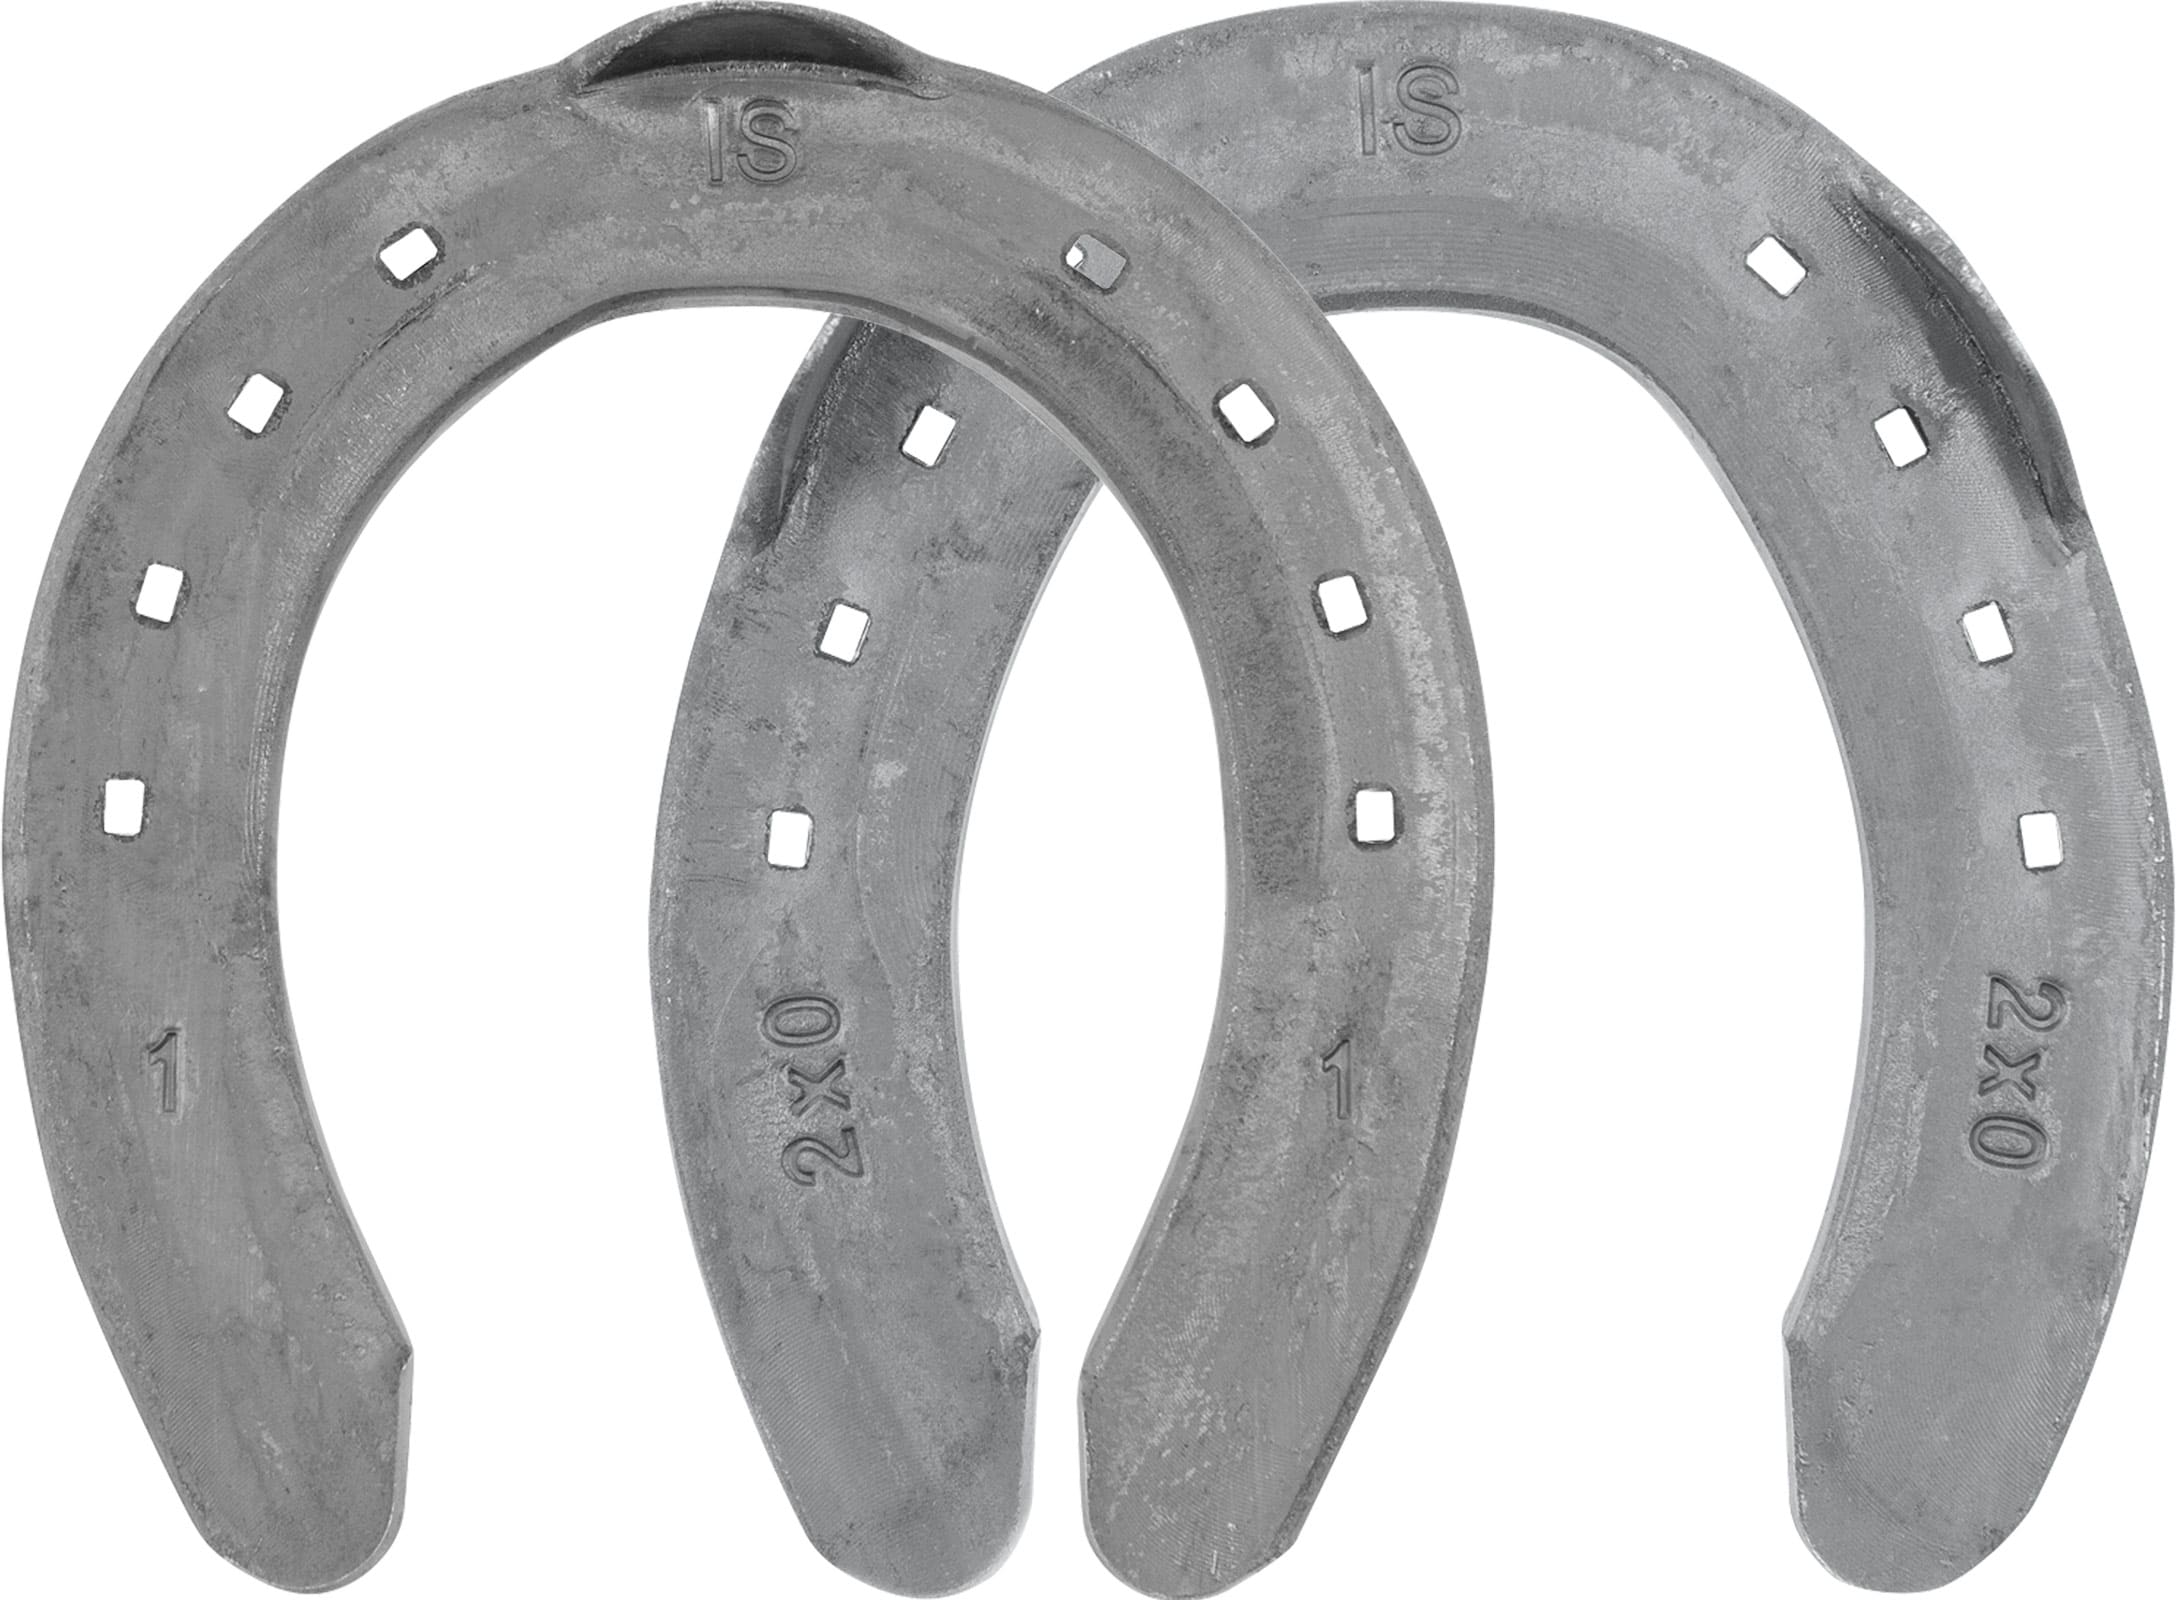 Mustad DM Icelandic horseshoes, front and hind, top view